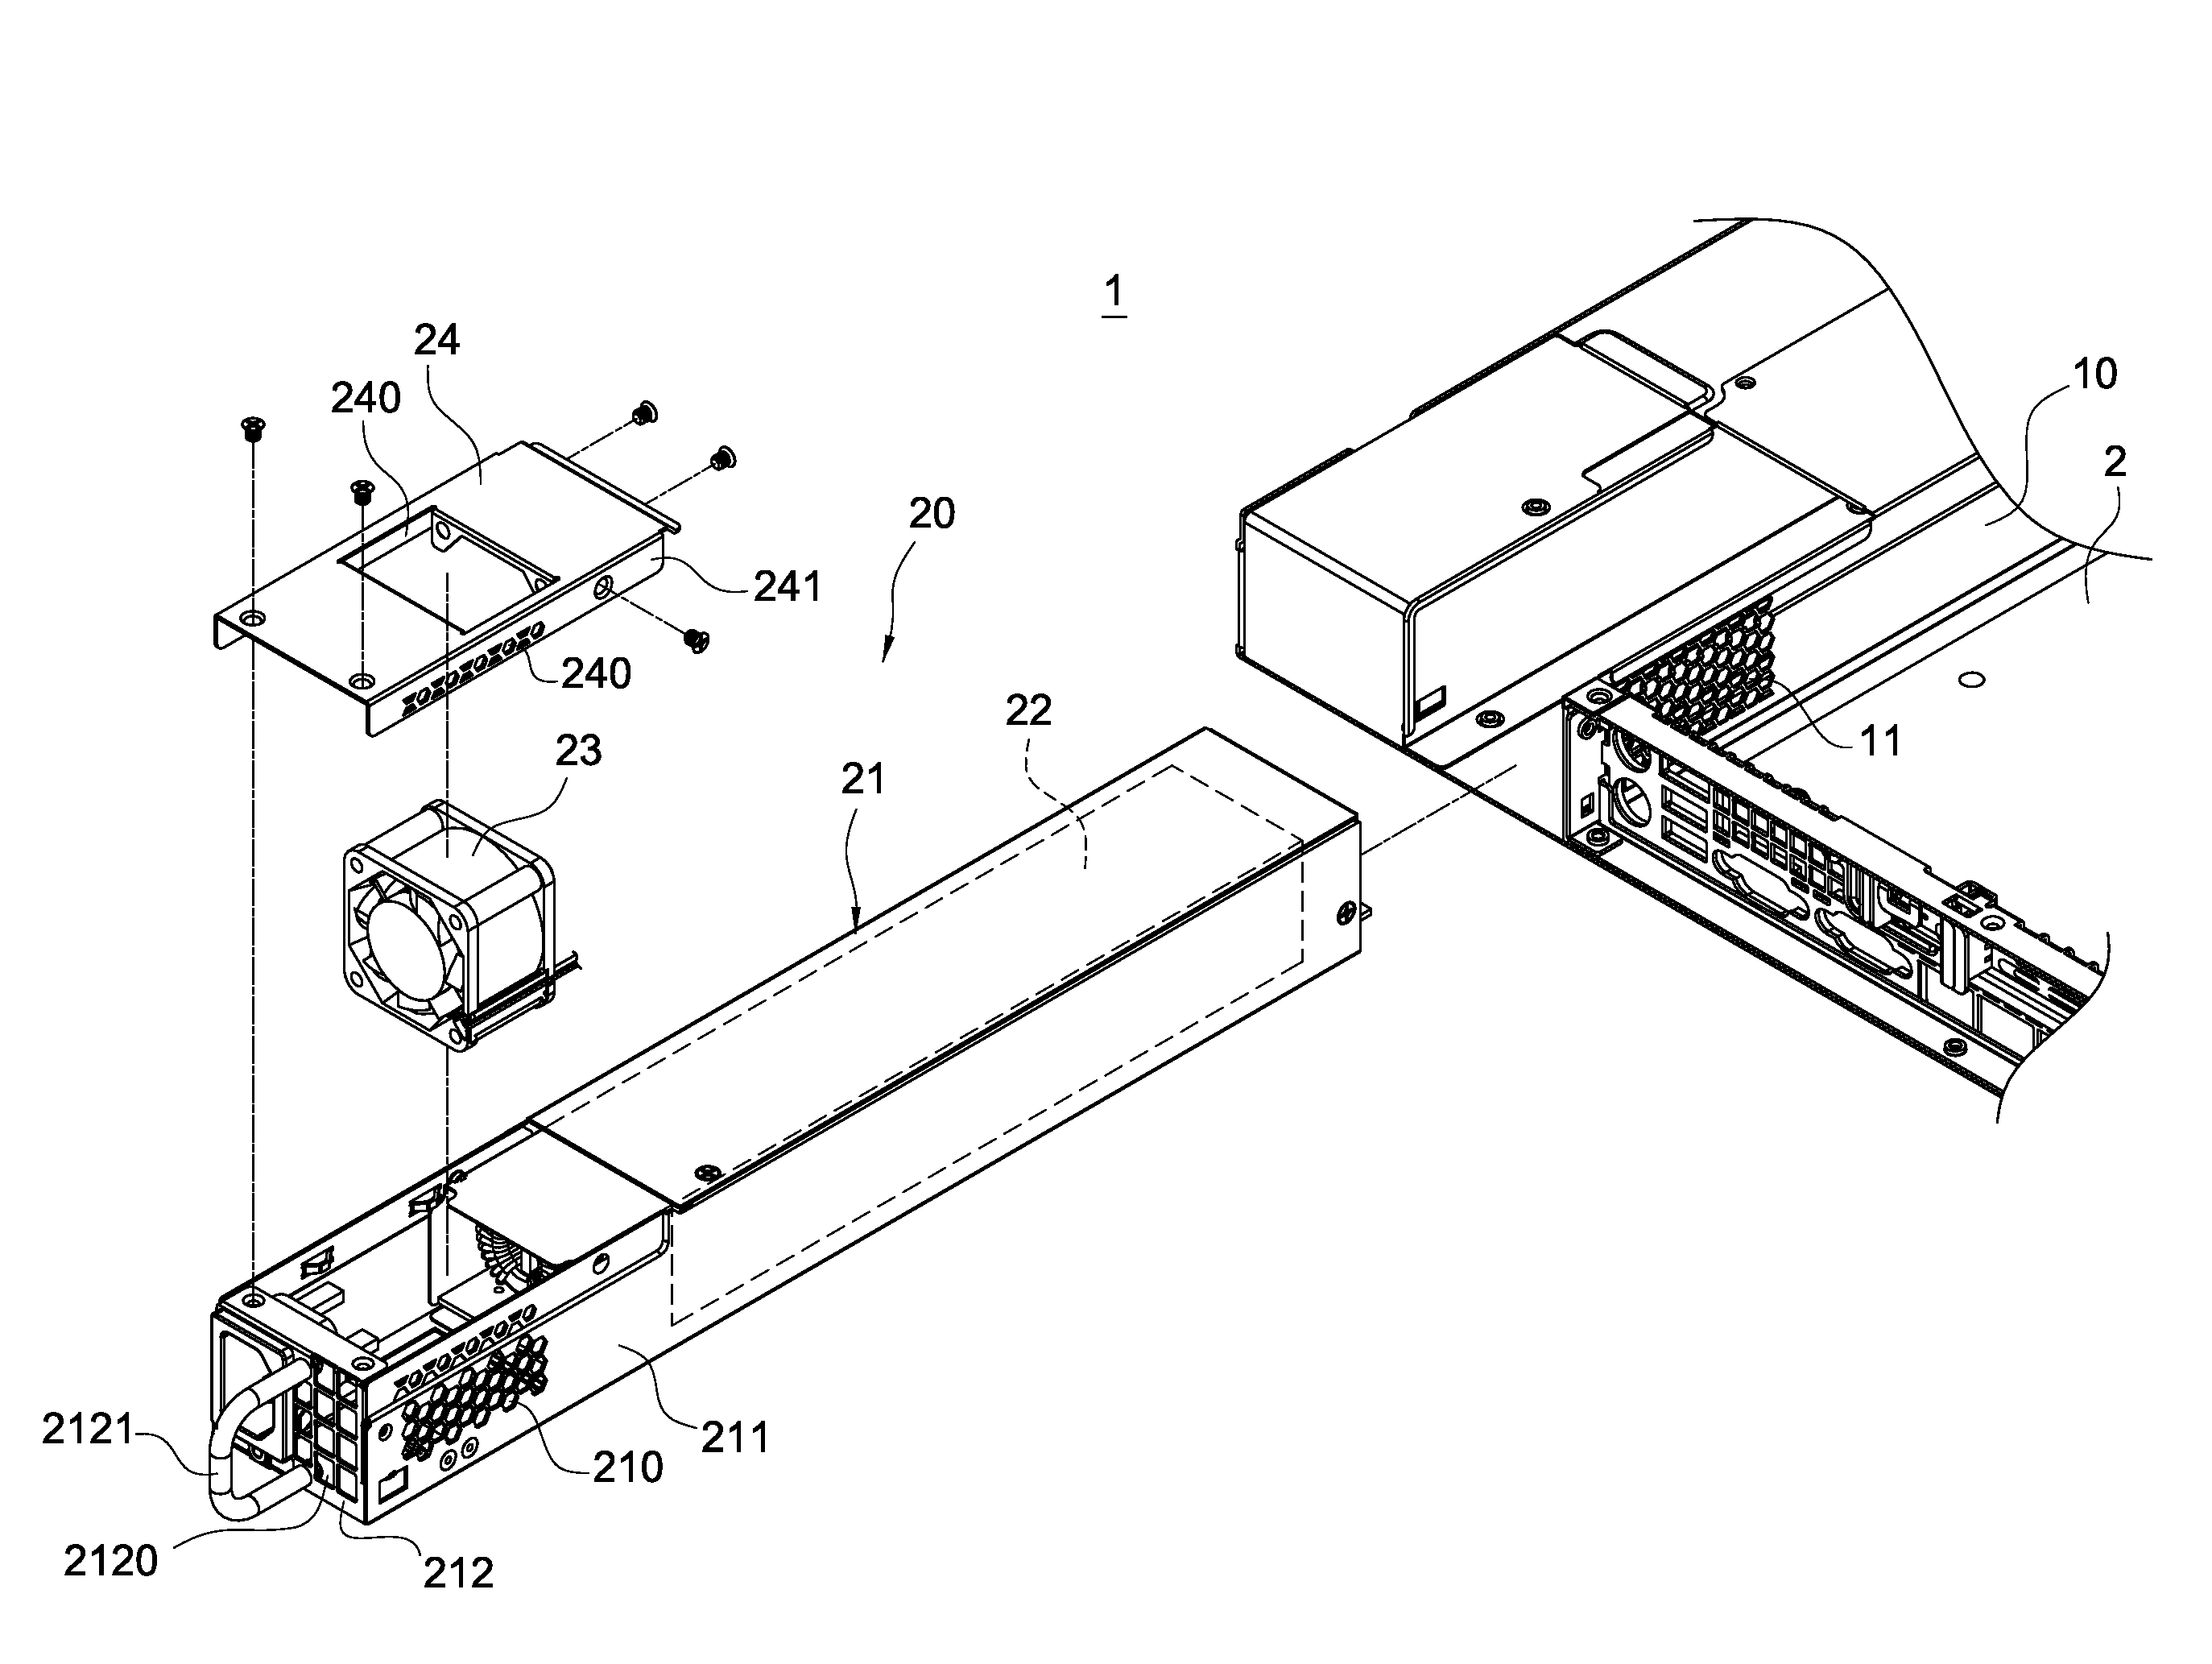 Heat-dissipating assembly for server